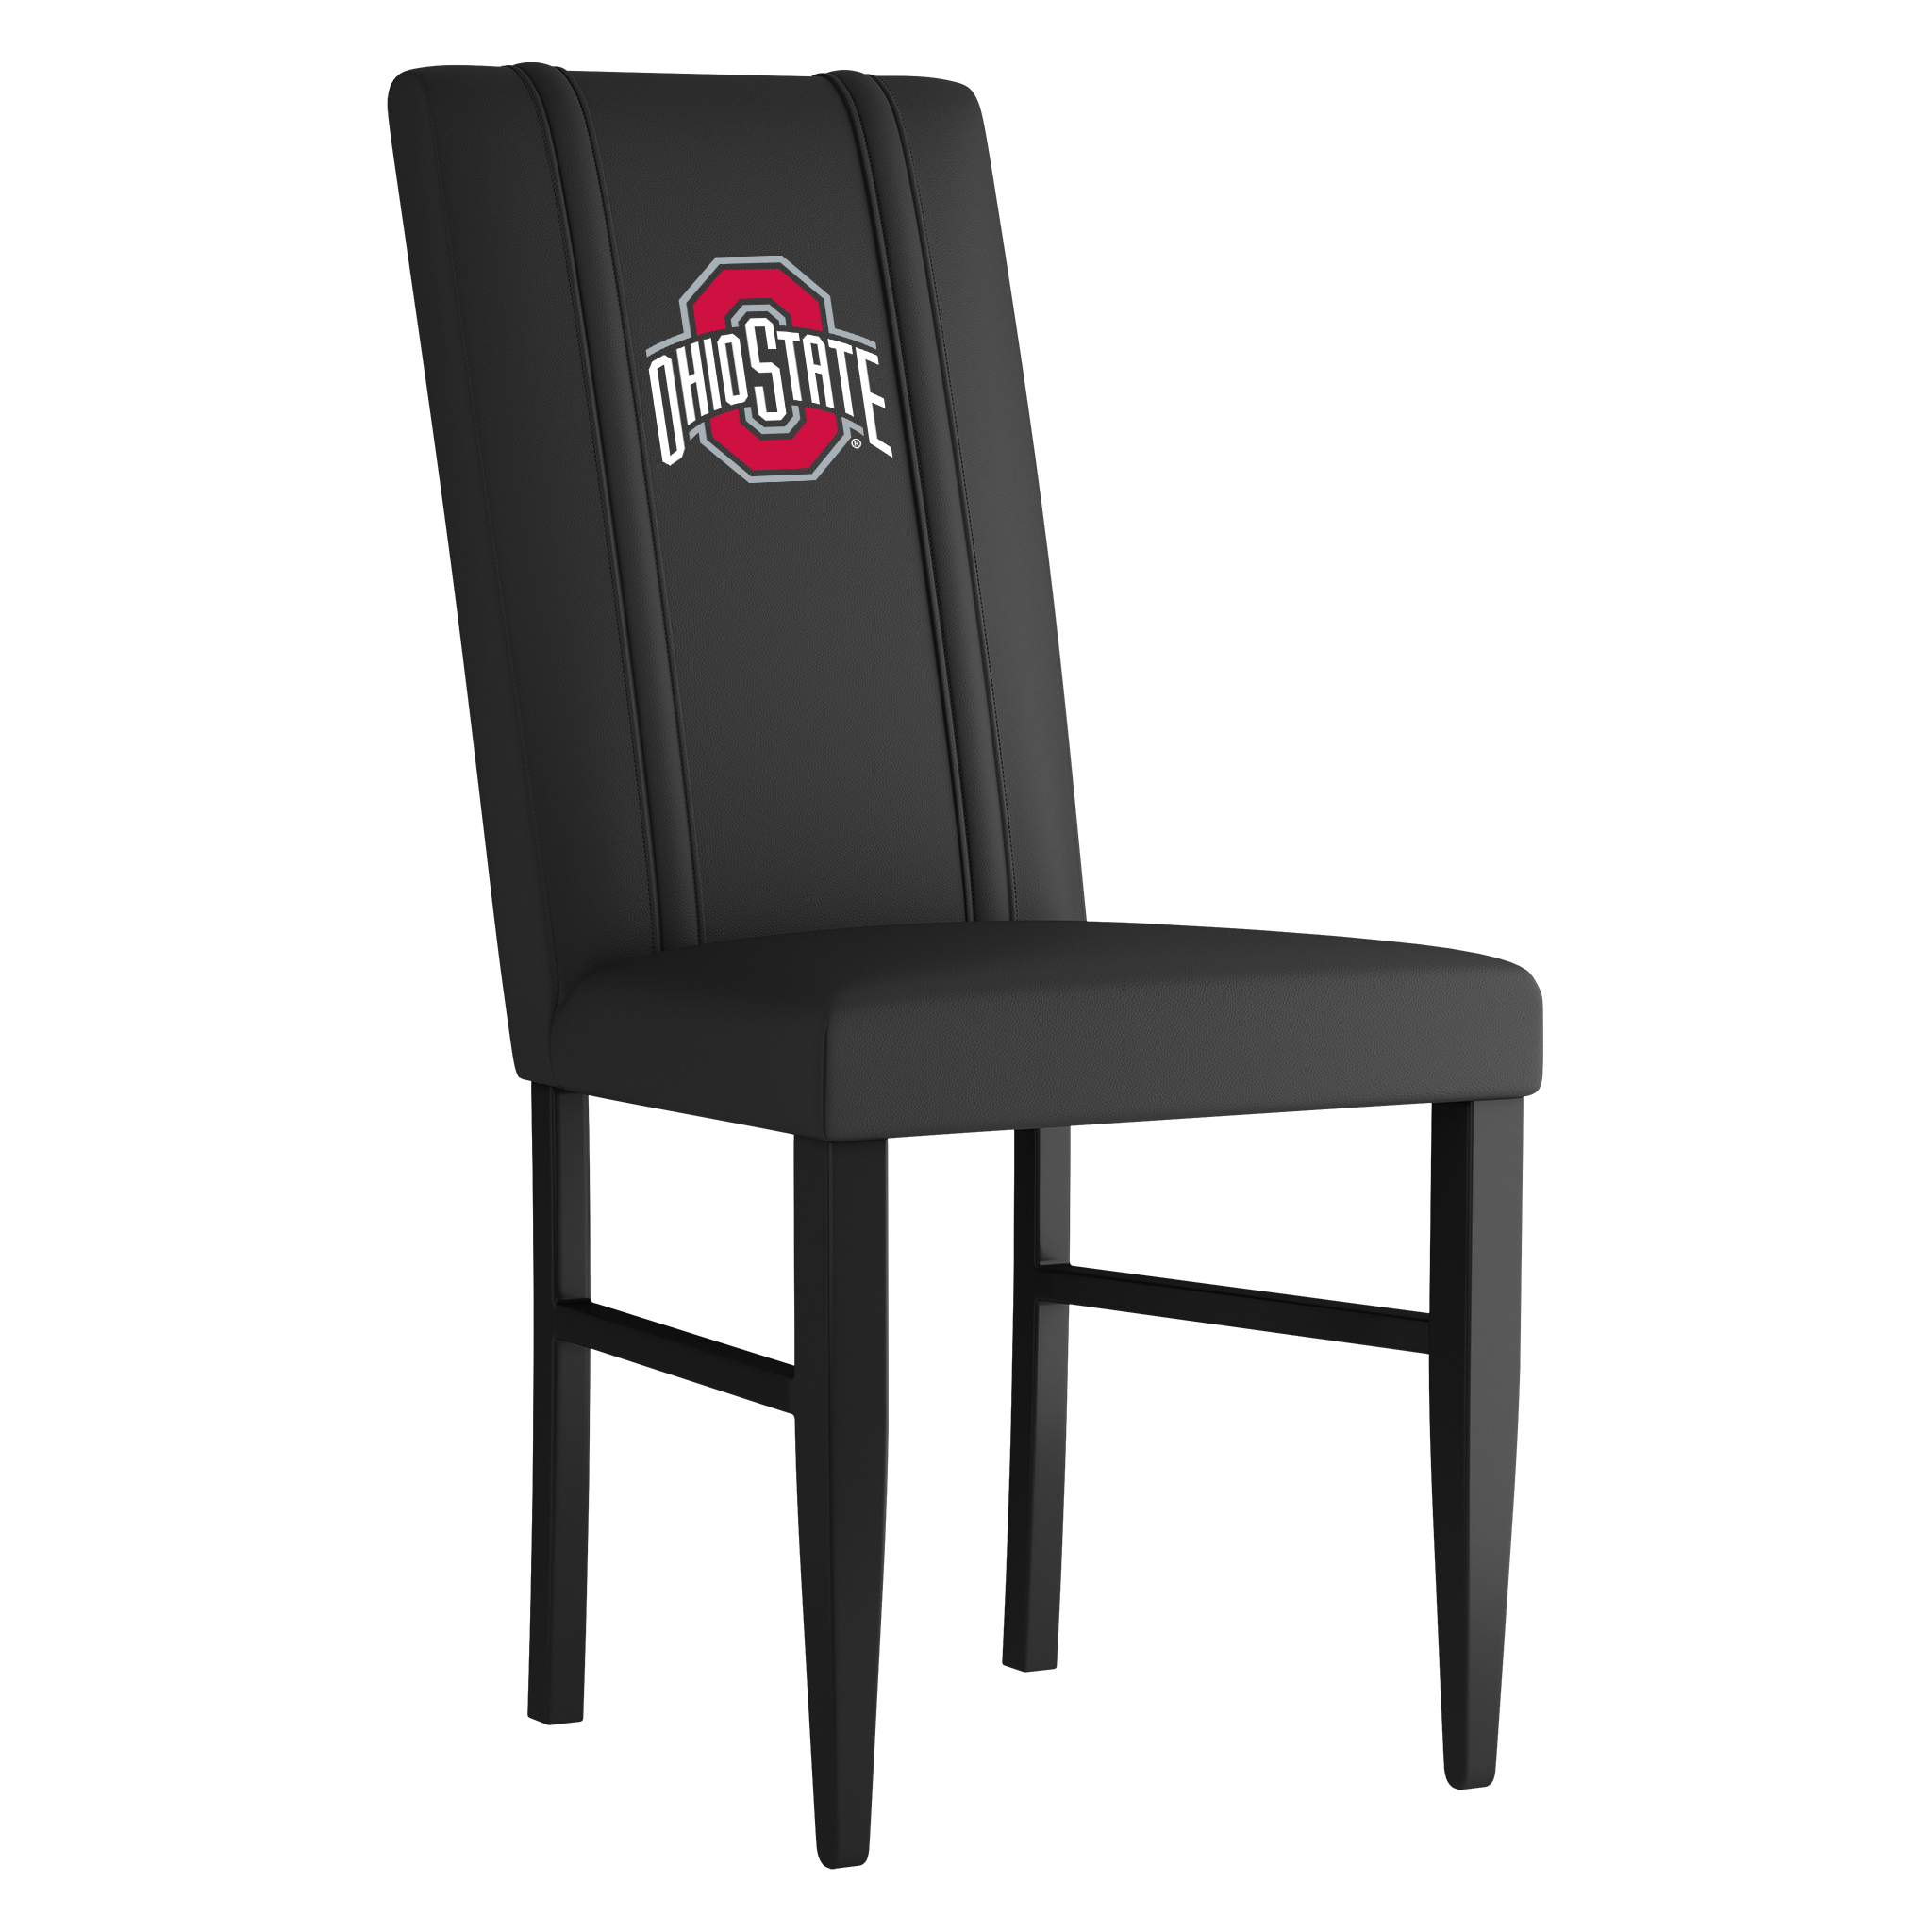 Ohio State Side Chair 2000 With Ohio State Primary Logo 1